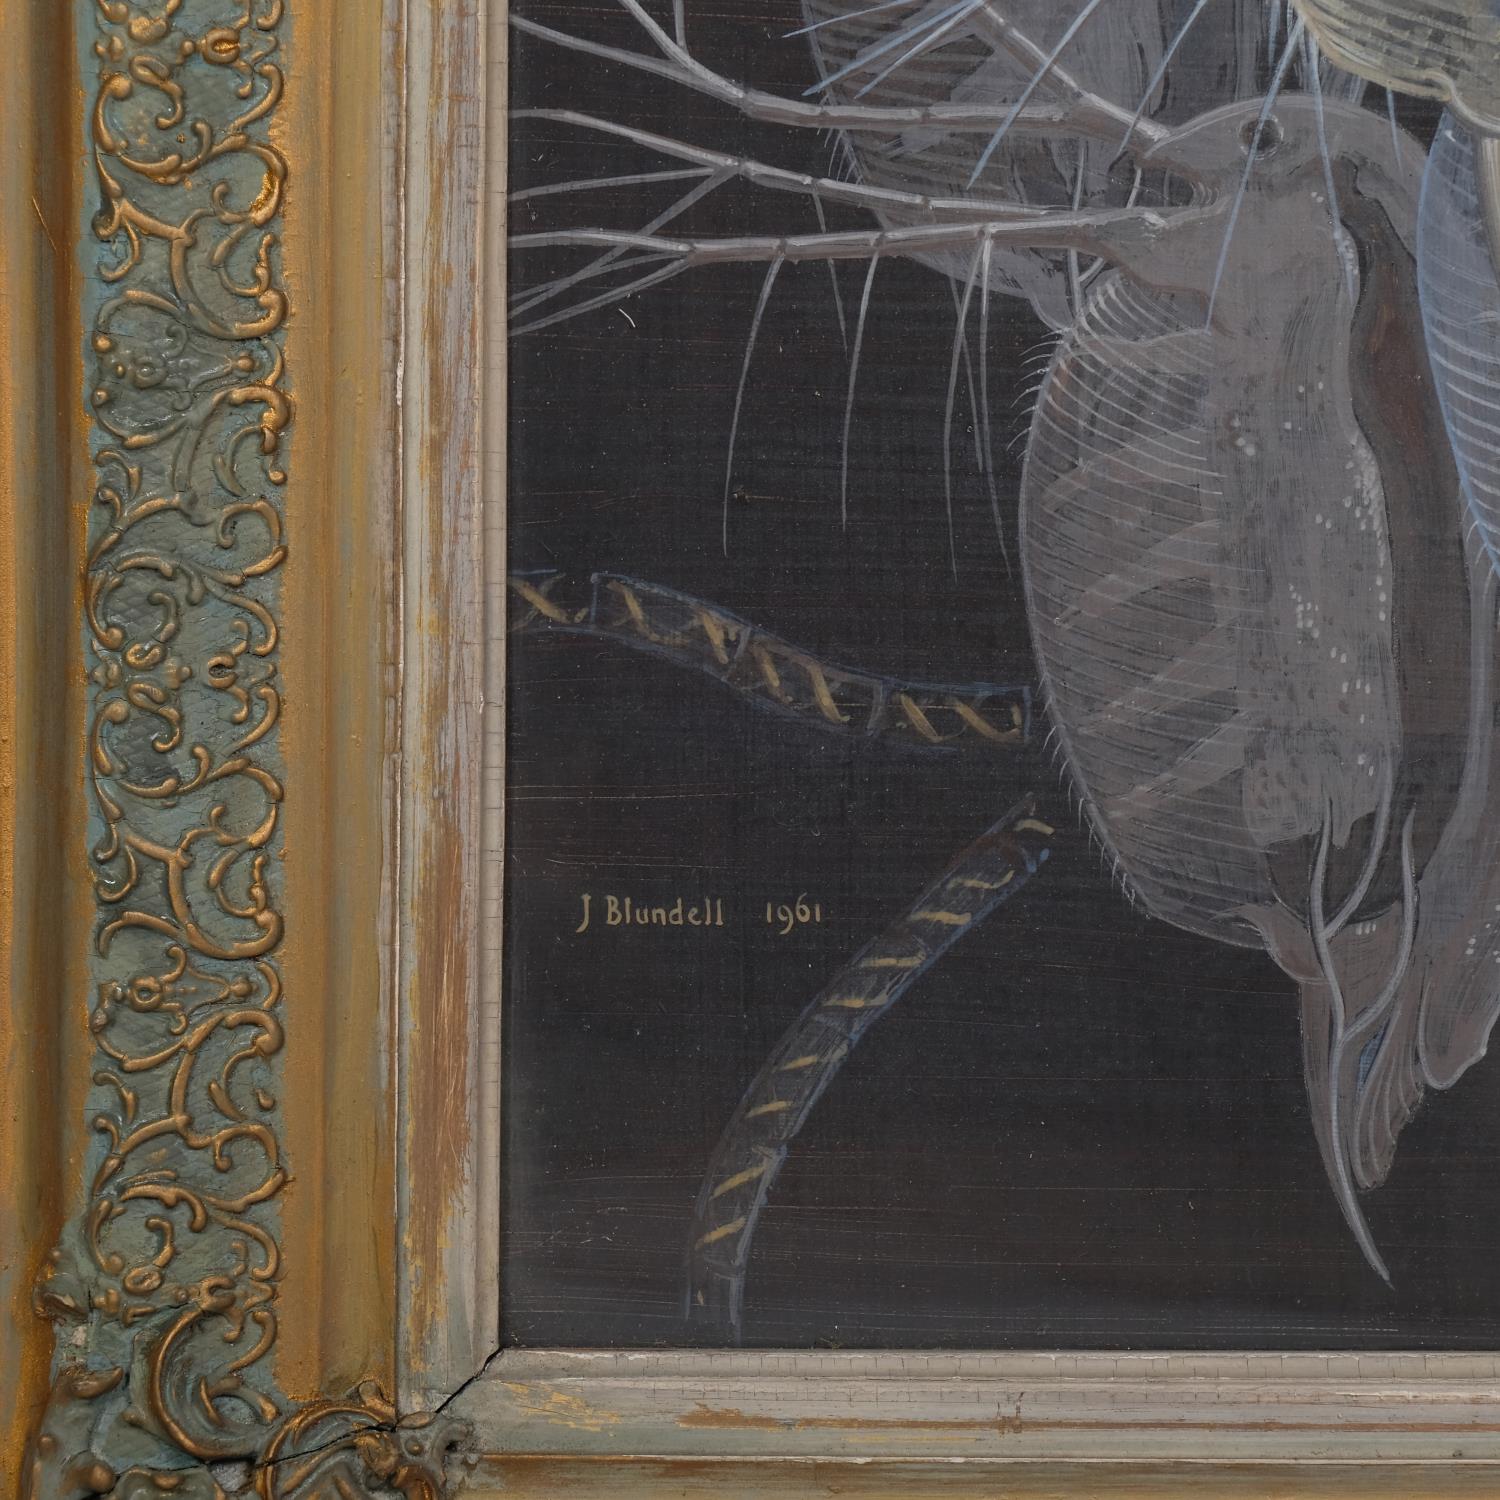 J Blundell, common sand flea, tempera on card, signed and dated 1961, 34cm x 27cm, framed Good - Image 3 of 4